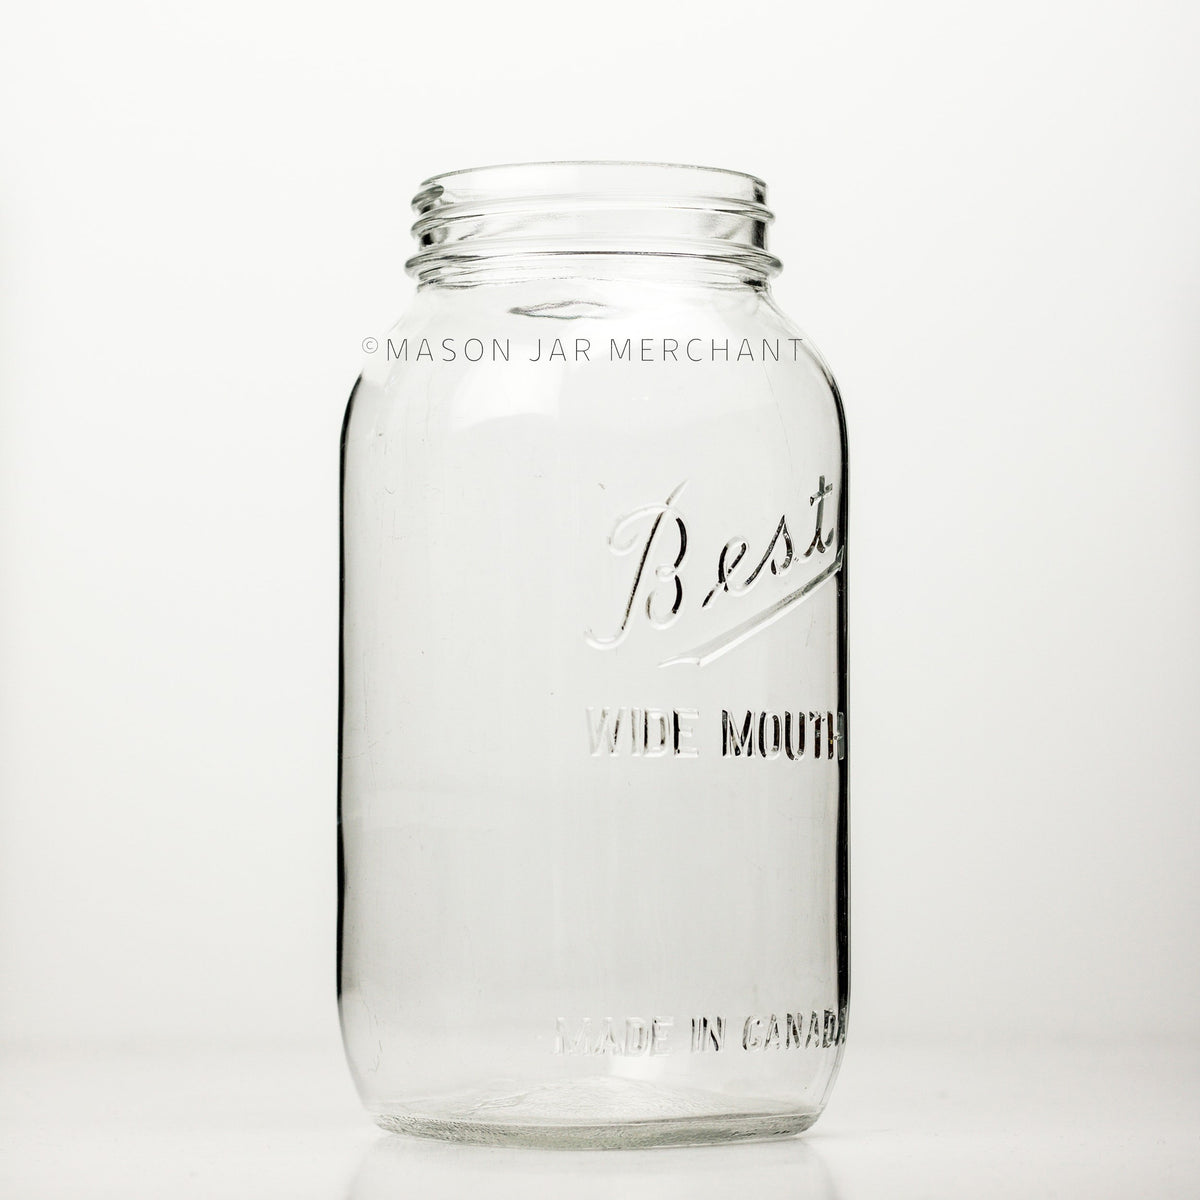 A side view of a Wide mouth half-gallon mason jar with Best Wide Mouth logo , against a white background